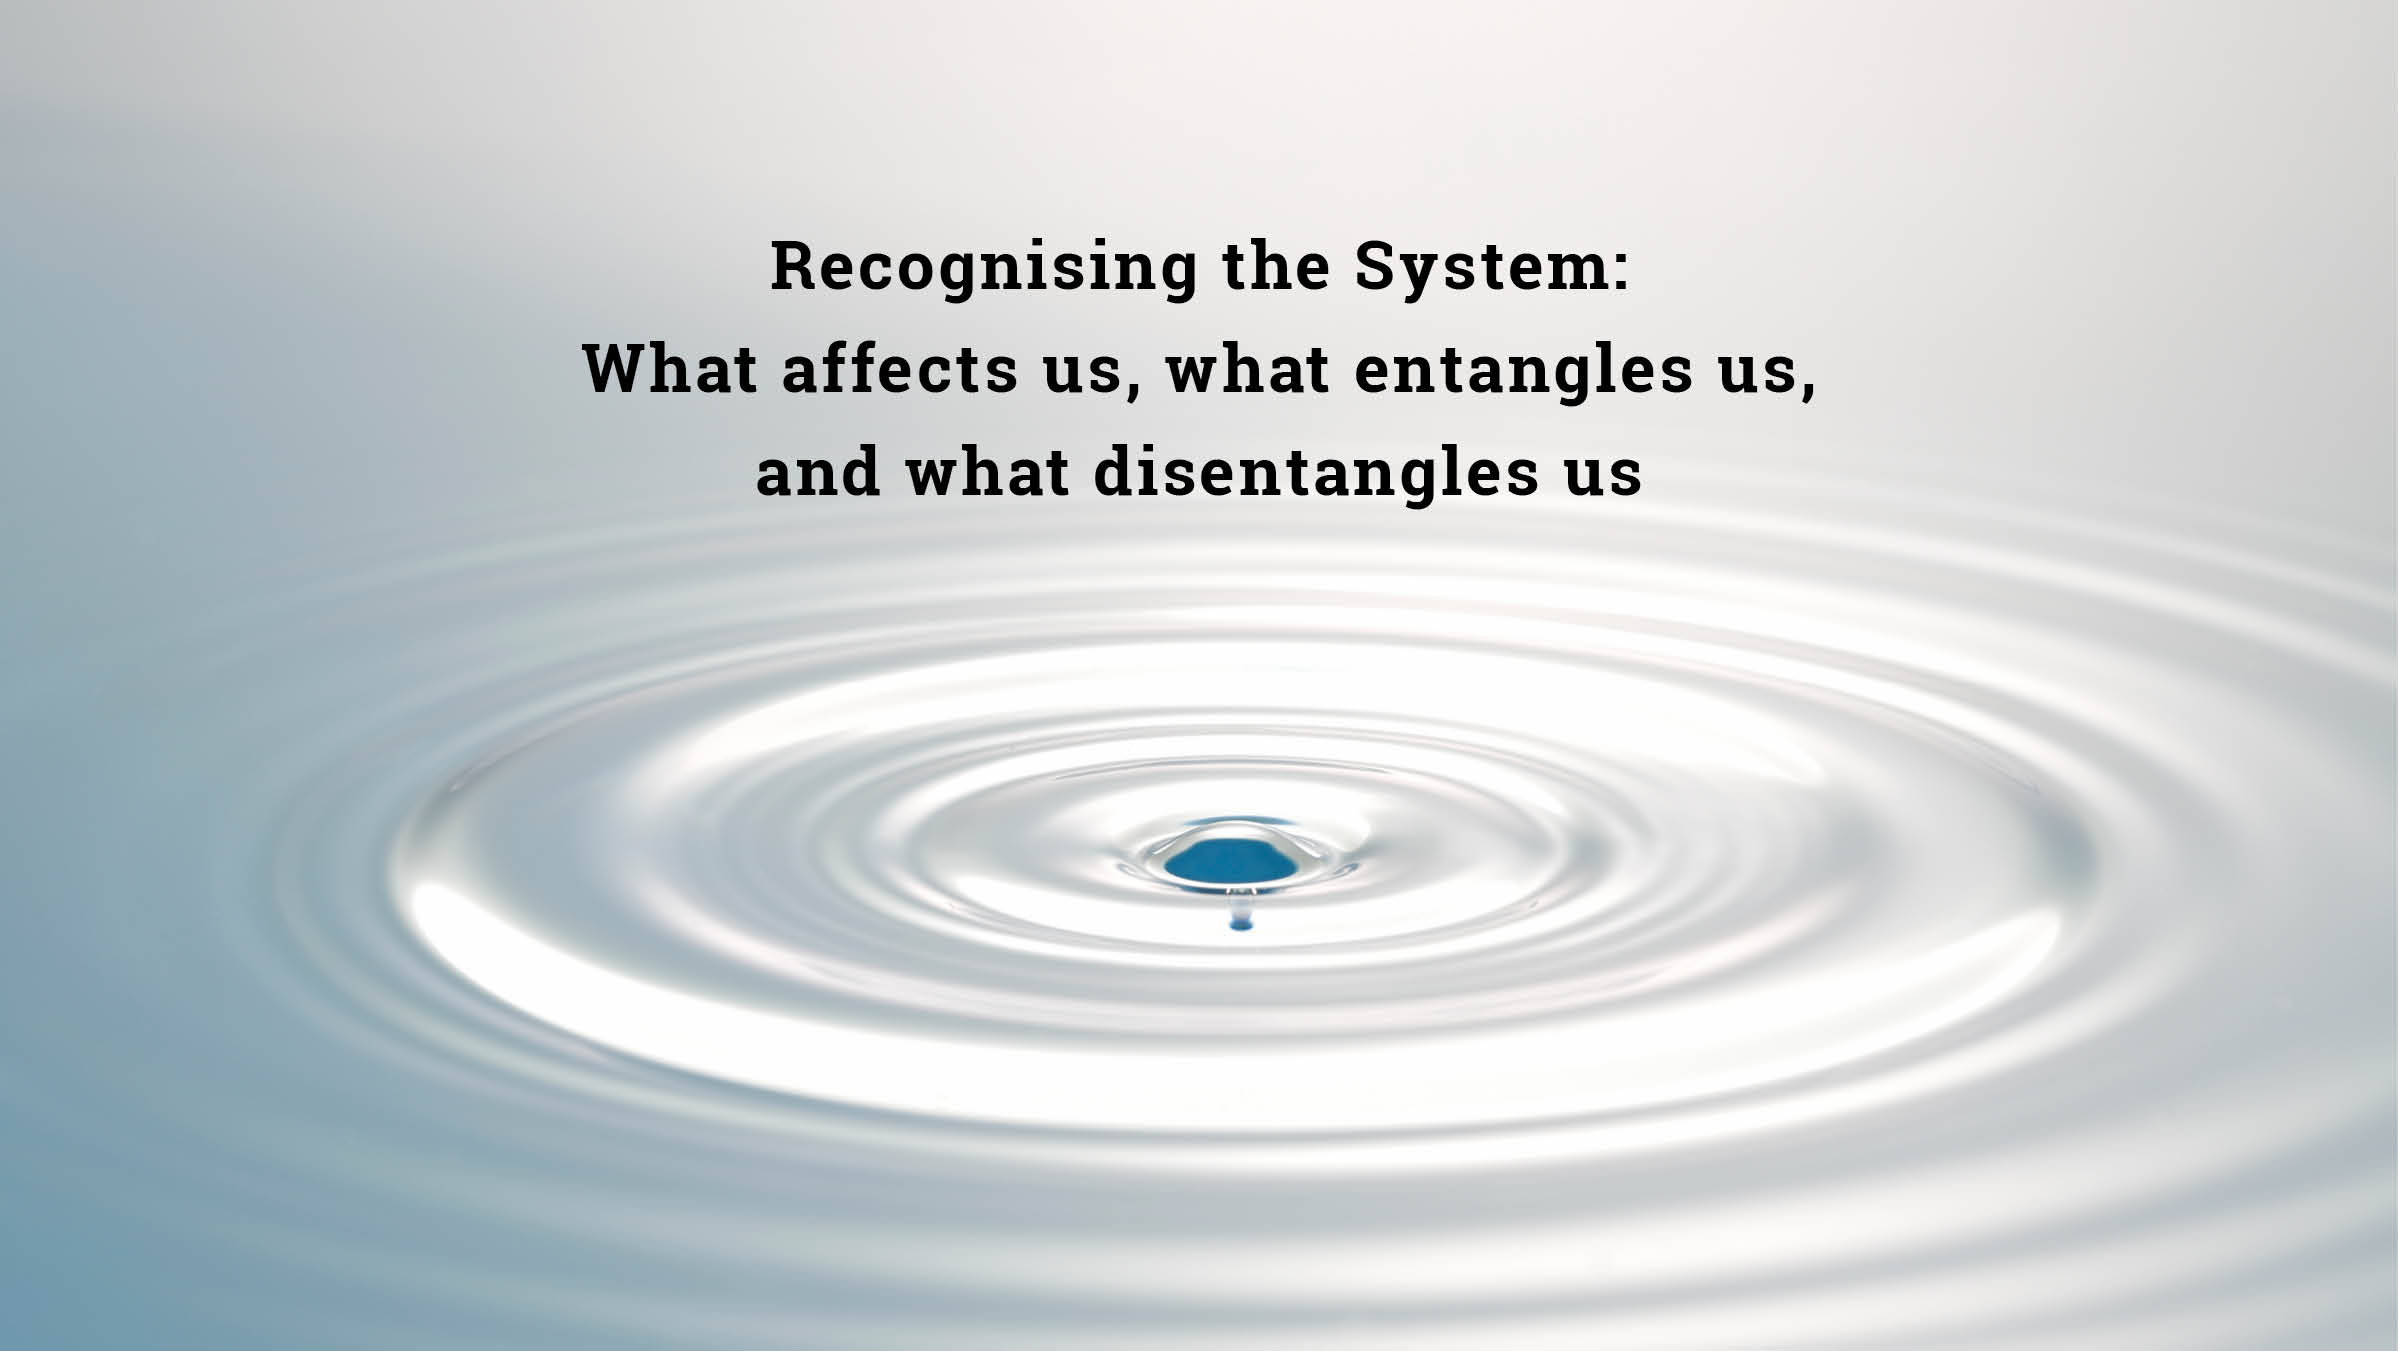 Recognising the System, what is!